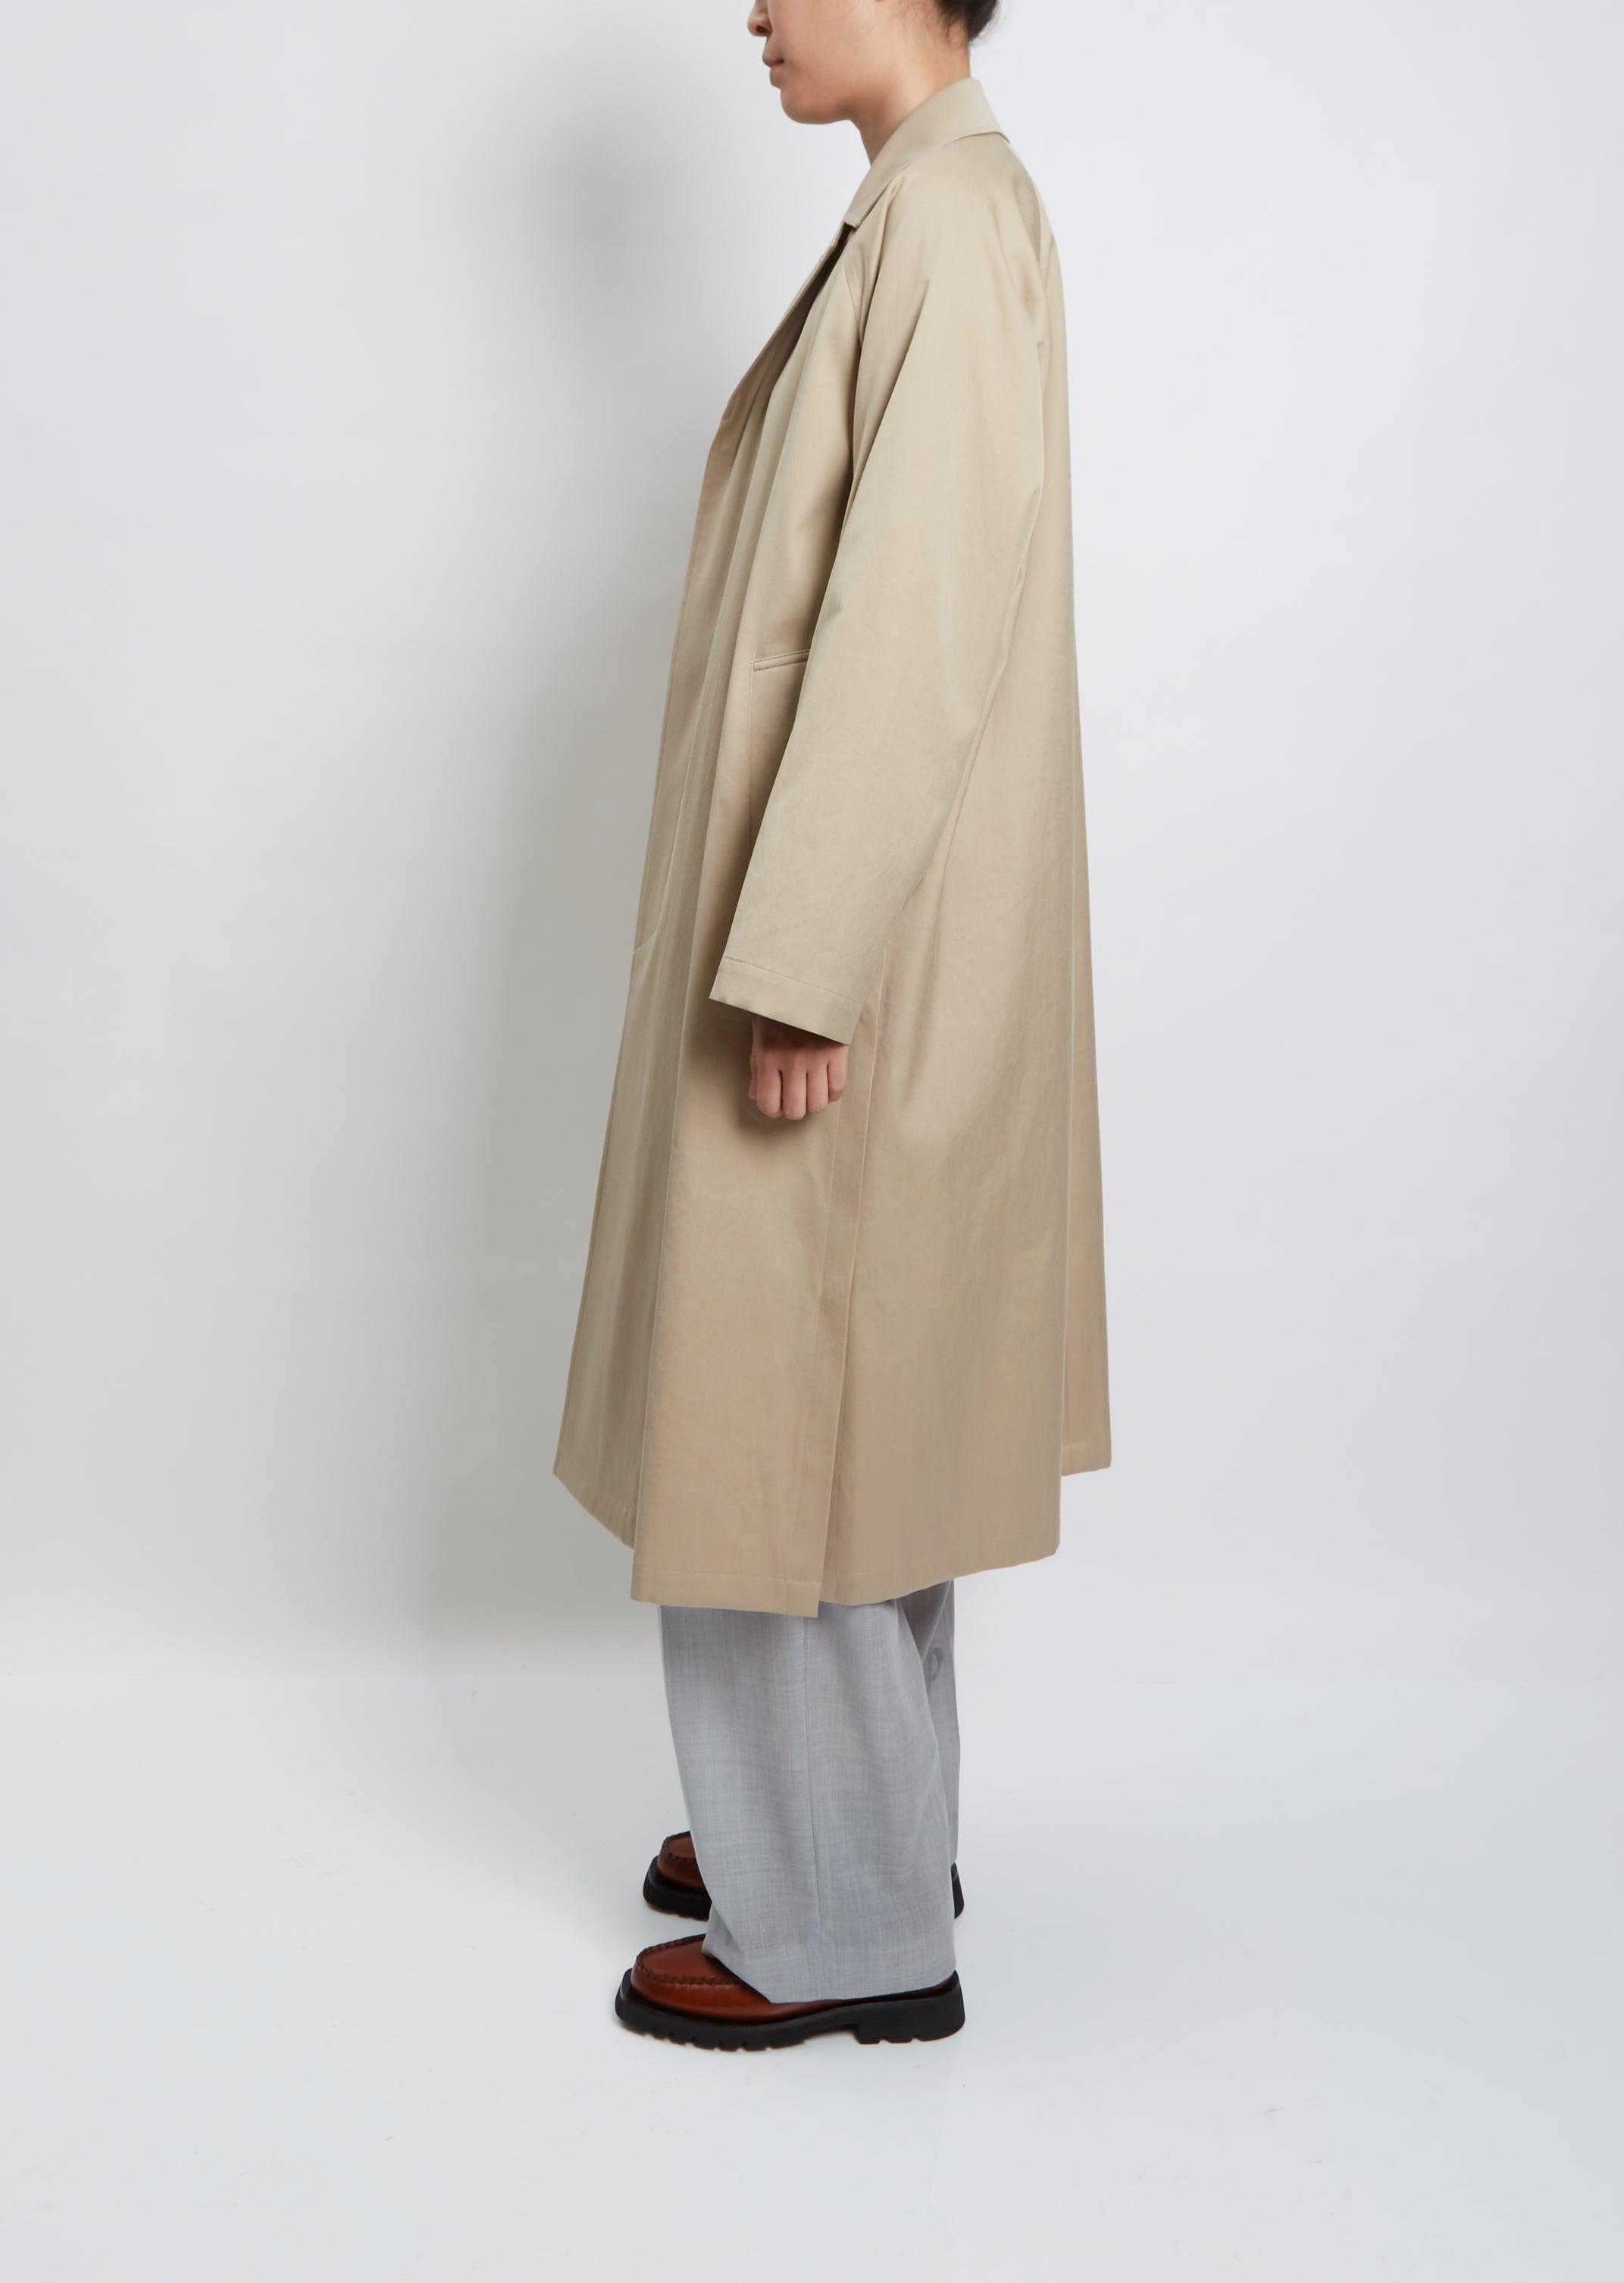 AURALEE Twill Trench Coat in Natural | Lyst